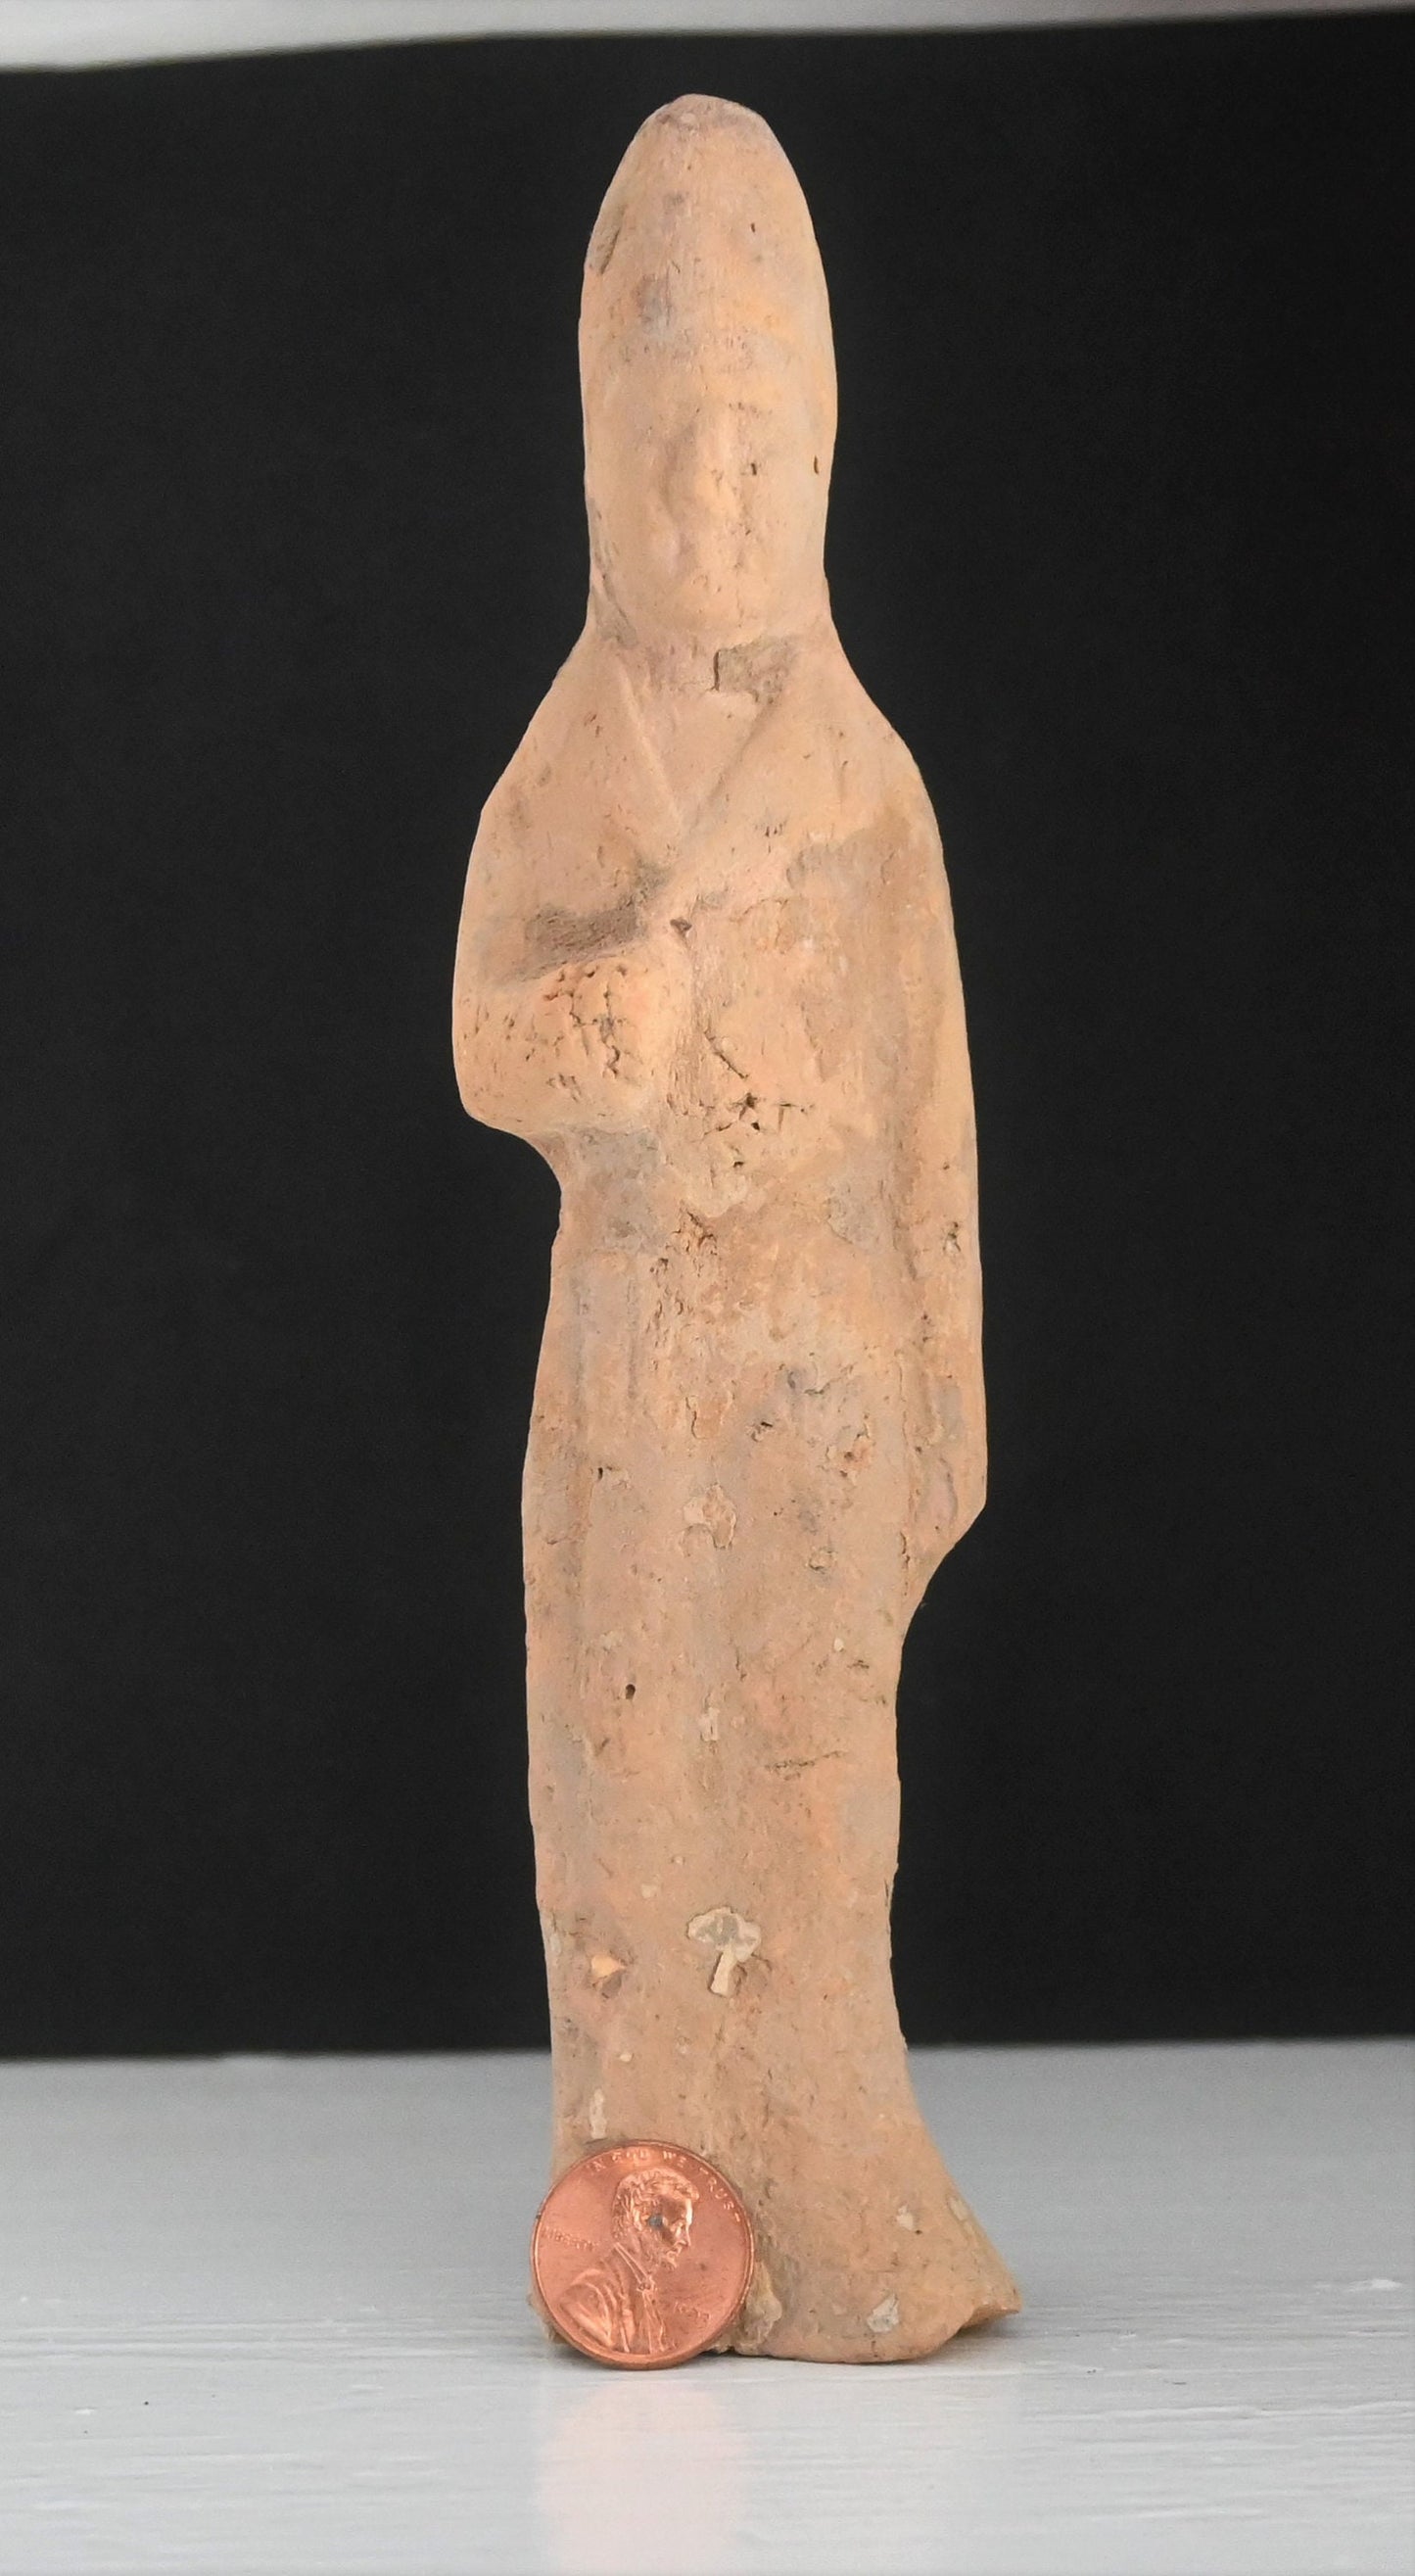 Authentic Han Dynasty, ca. 206 BCE to 220 CE mold-formed terracotta tomb attendant  7 5/8 inches with COA and provenance